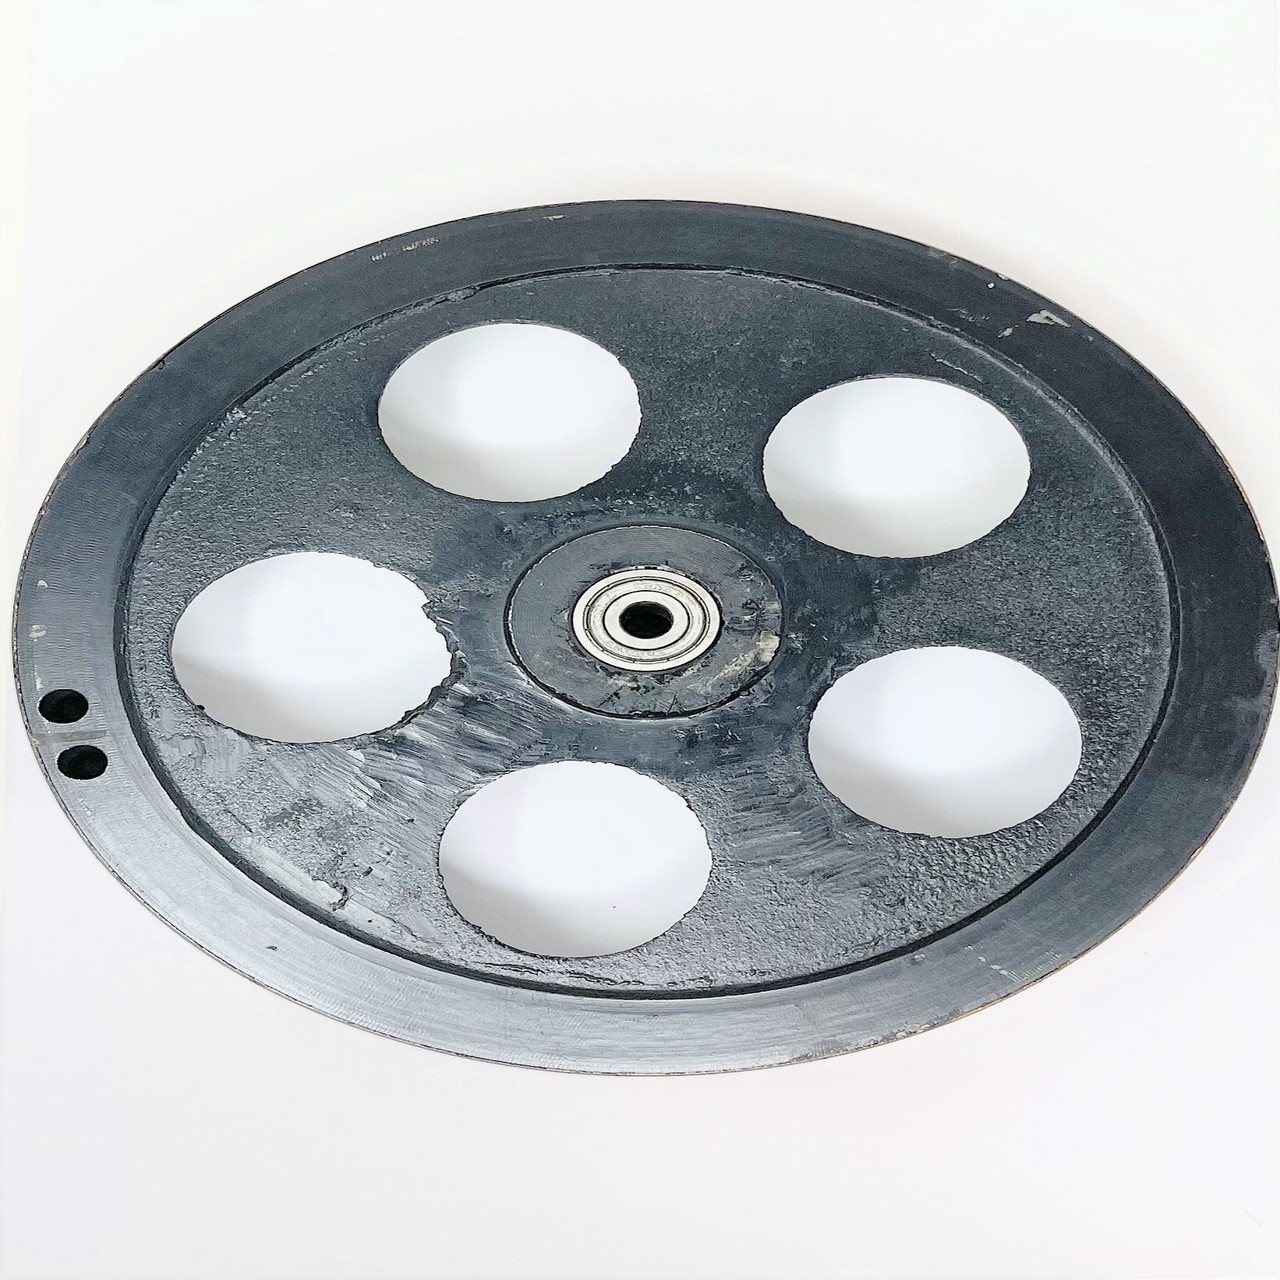 Elliptical 10" Drive Pulley With Bearing Part Number 251968